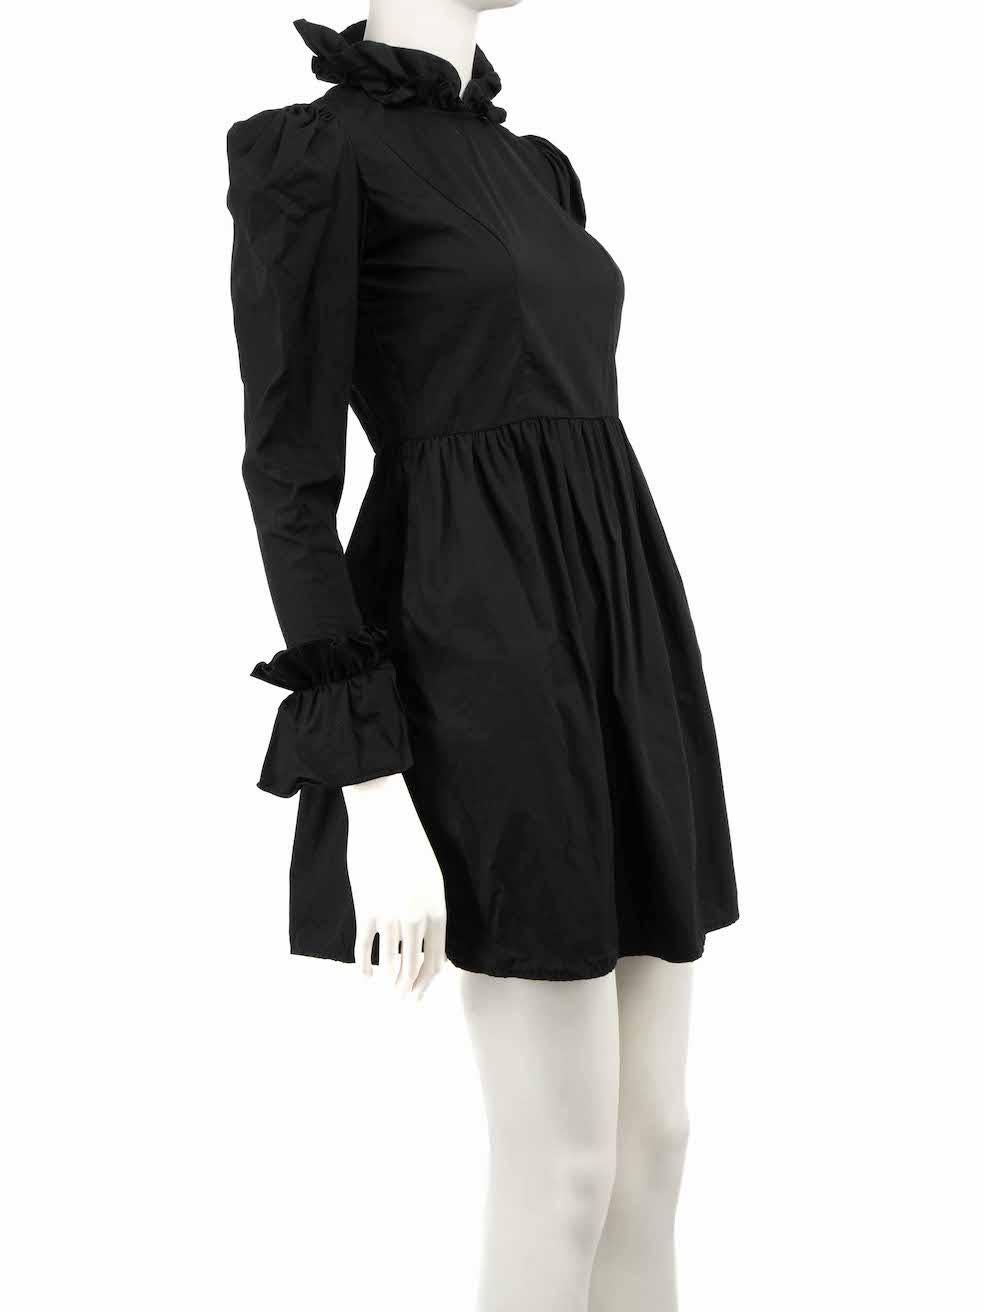 CONDITION is Very good. Hardly any visible wear to dress is evident on this used Batsheva designer resale item.
 
 
 
 Details
 
 
 Black
 
 Cotton
 
 Mini dress
 
 Long sleeves
 
 Ruffles accent
 
 Round neckline
 
 2x Front side pockets
 
 Back